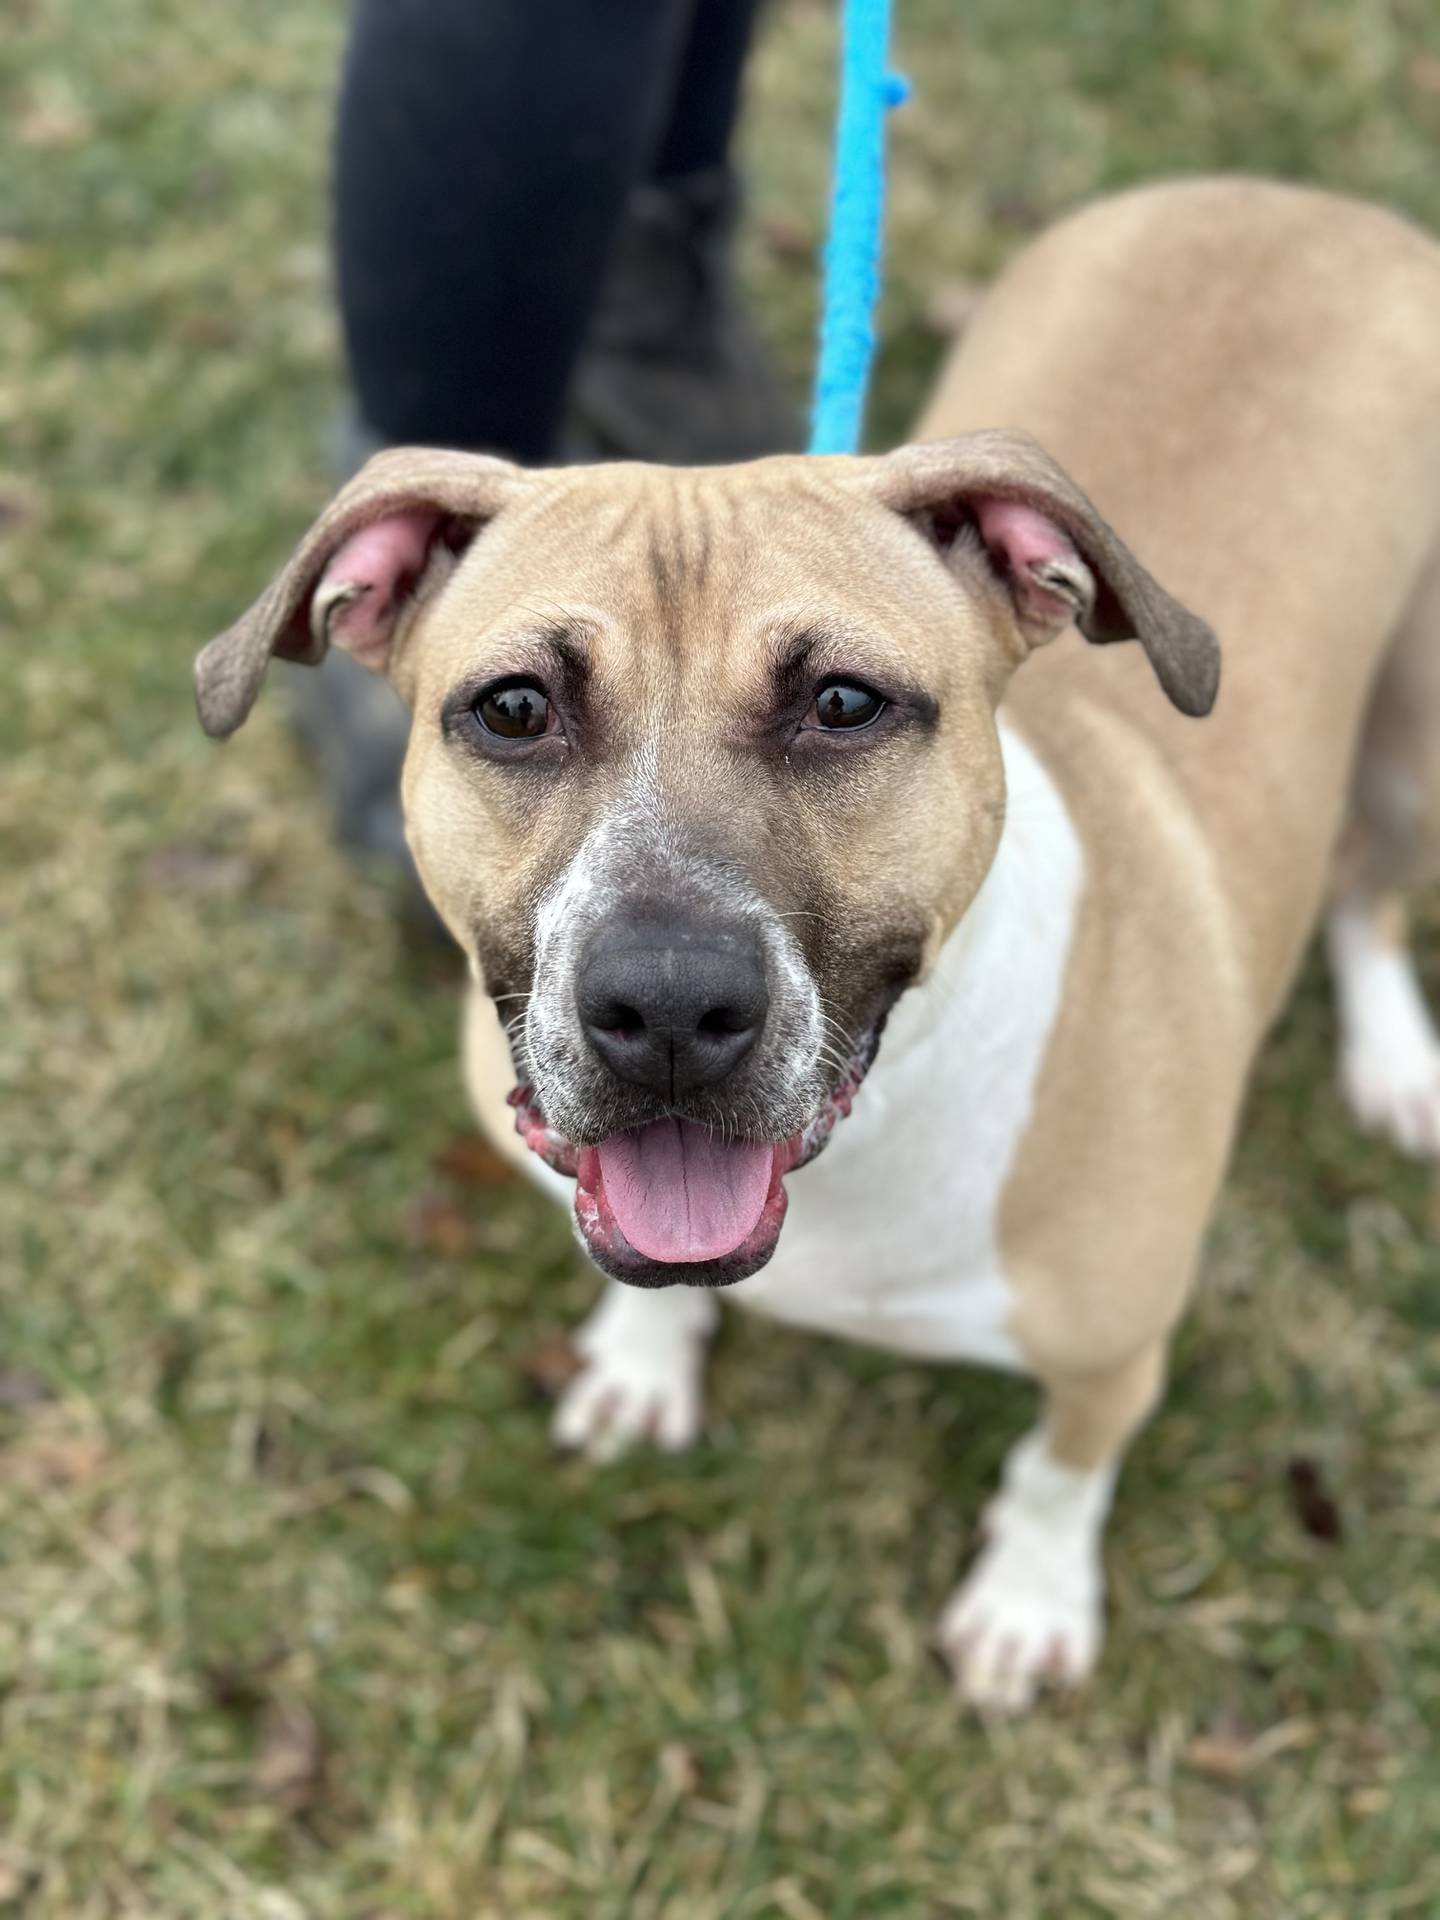 CeCe is a 2-year-old terrier mix. She’s shy only when meeting new people. She does well with other dogs her size, but she needs a home without small dogs or cats.  She loves belly rubs, playing tug with toys and going on walks. She is potty-trained. To meet CeCe, email Dogadoption@nawsus.org. Visit nawsus.org.